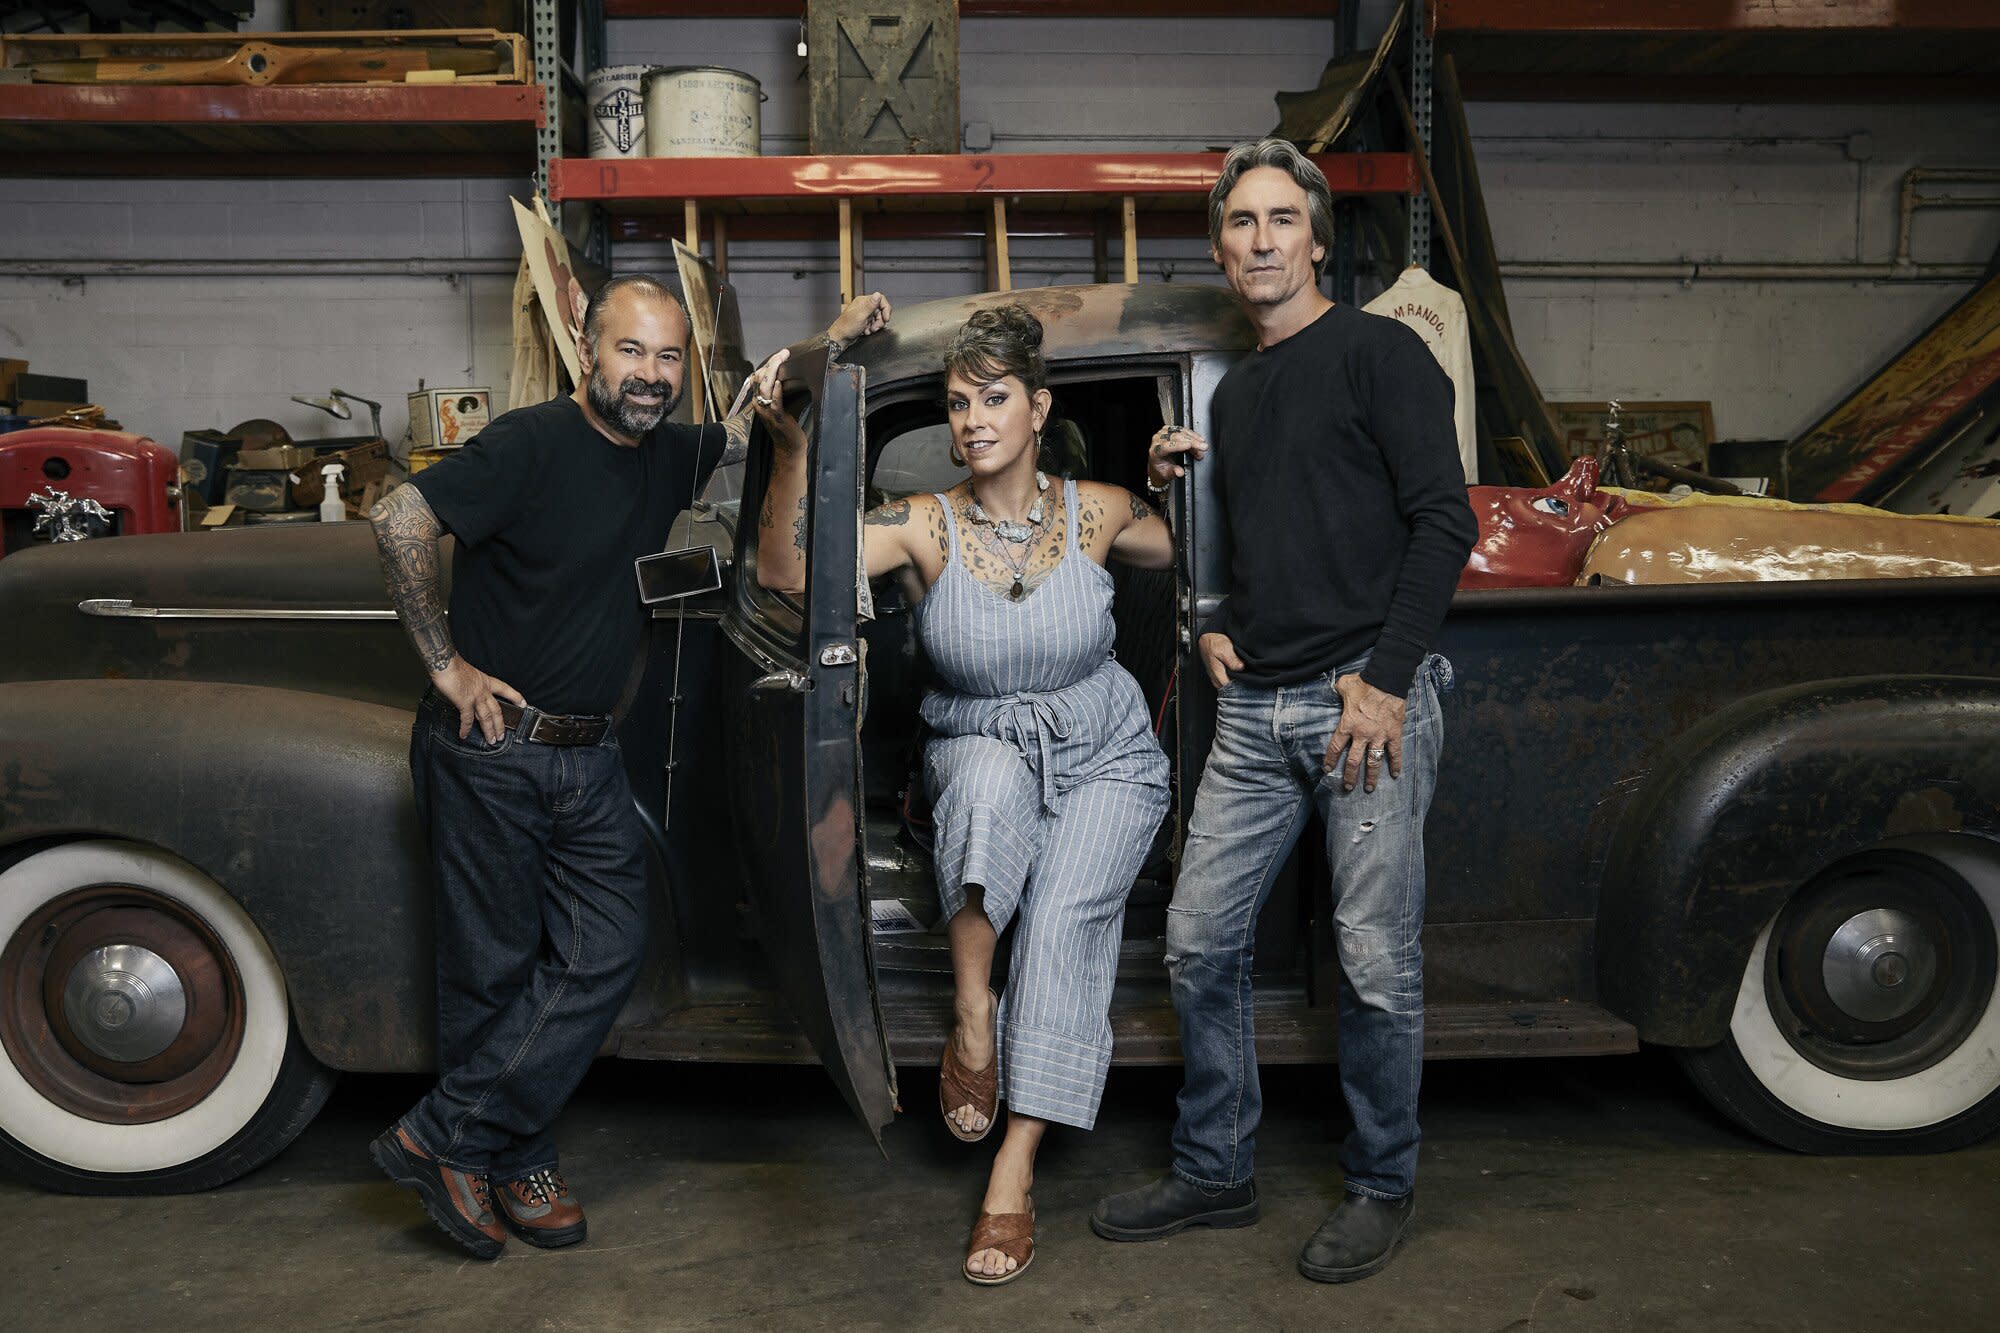 American Pickers Danielle Colby Saddened By Frank Fritzs Exit From Show Hopes He Gets Help 